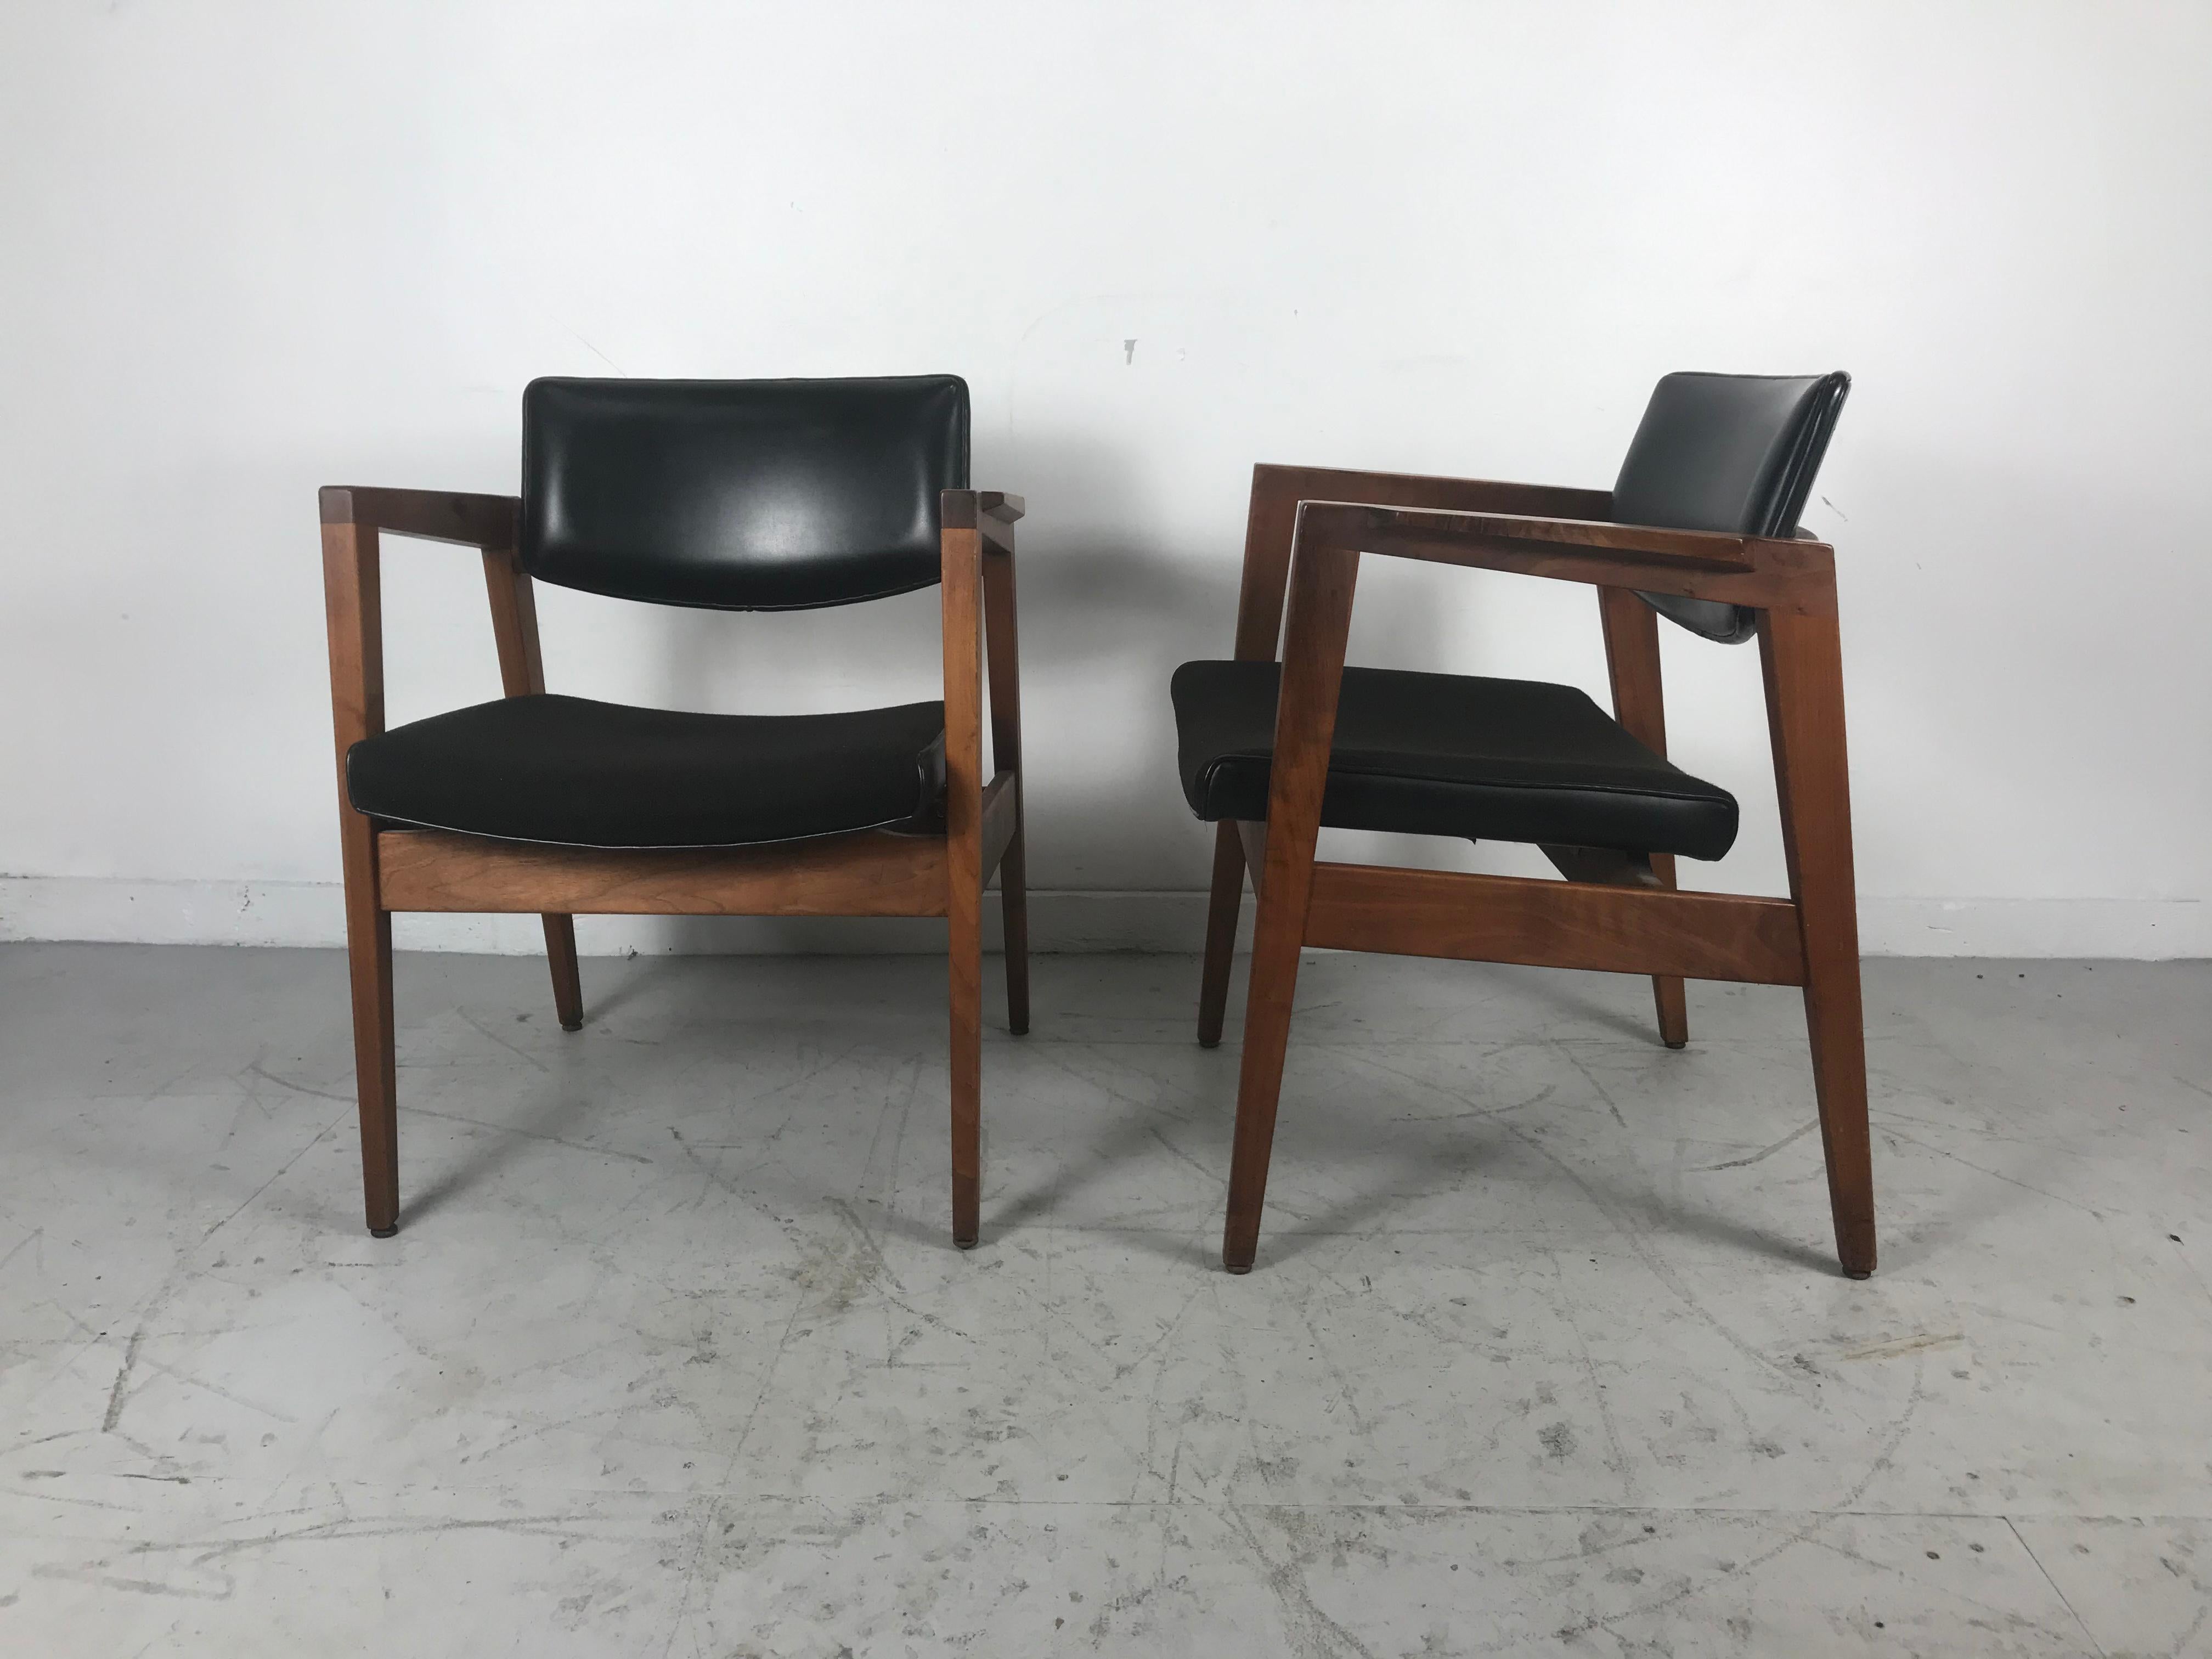 Classic Mid-Century Modern arm / lounge chairs, walnut frames by Gunlocke style and design reminiscent of Jens Risom designs. Superior quality and construction, extremely comfortable, retains original Naugahyde and wool seats and backs, in nice